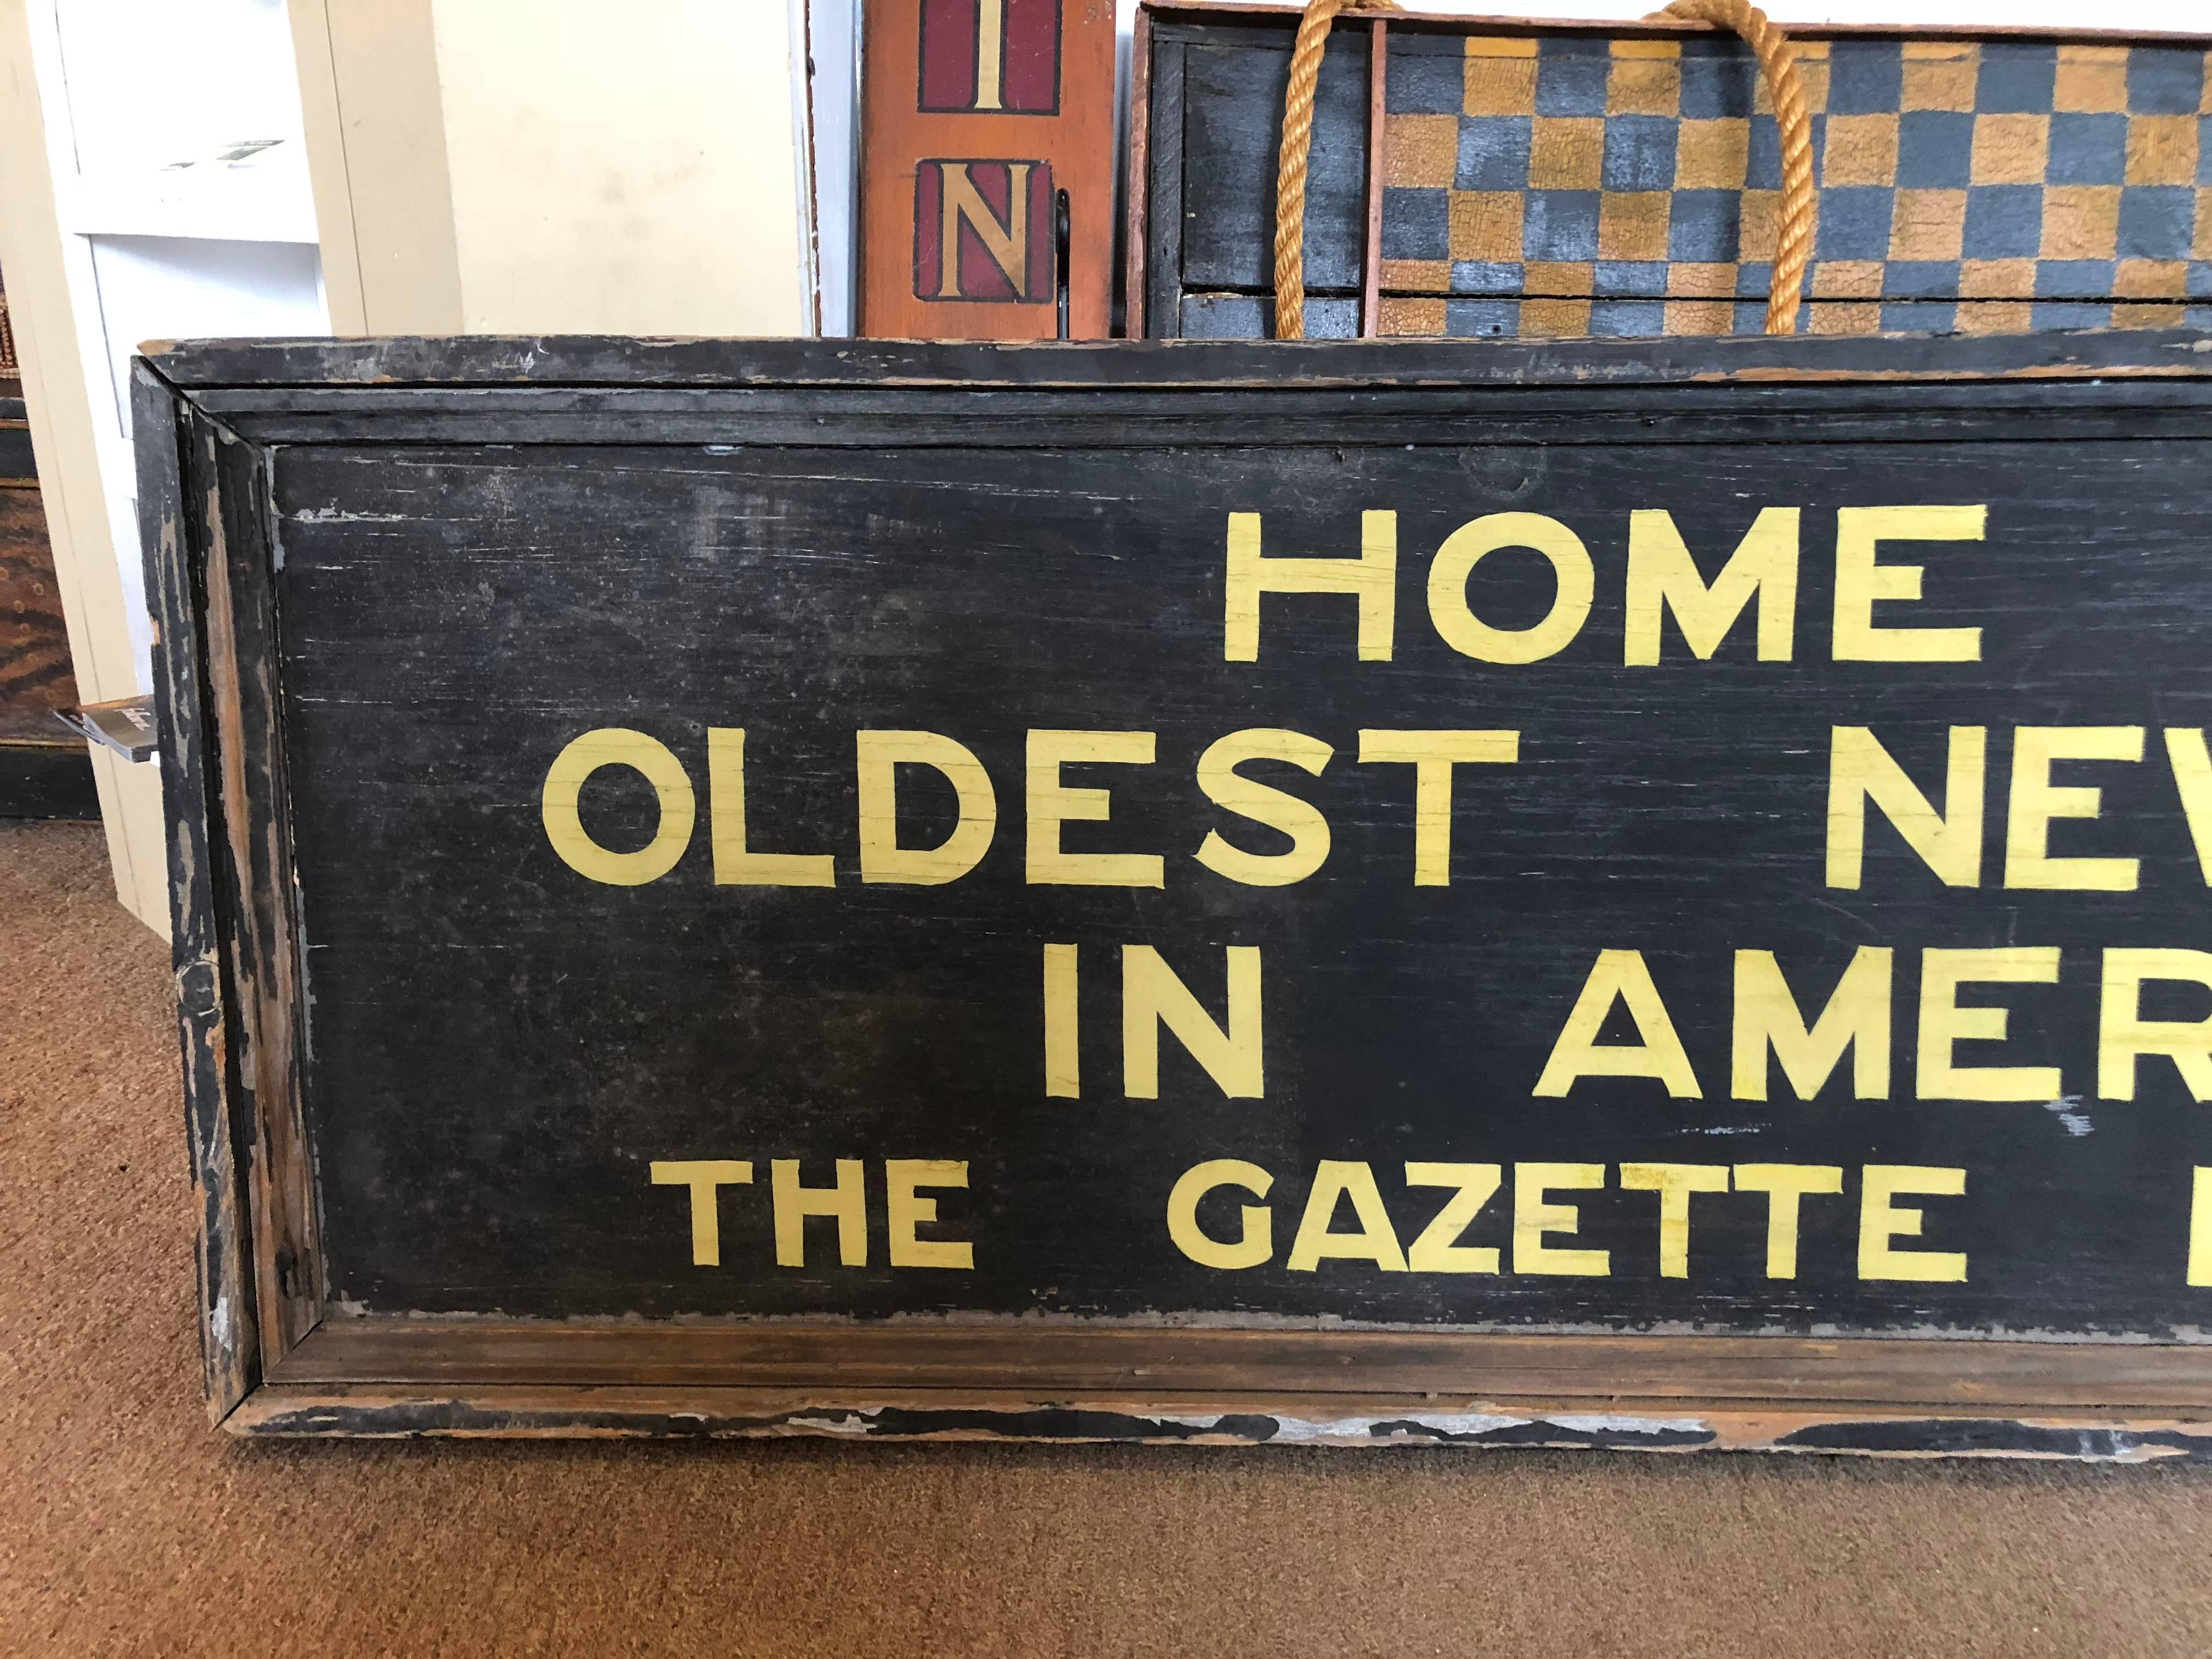 The New Hampshire Gazette is a non-profit, alternative, bi-weekly newspaper published in Portsmouth, New Hampshire. Its editors claim that the paper, published on-and-off in one form or another since 1756, is the oldest newspaper in the United